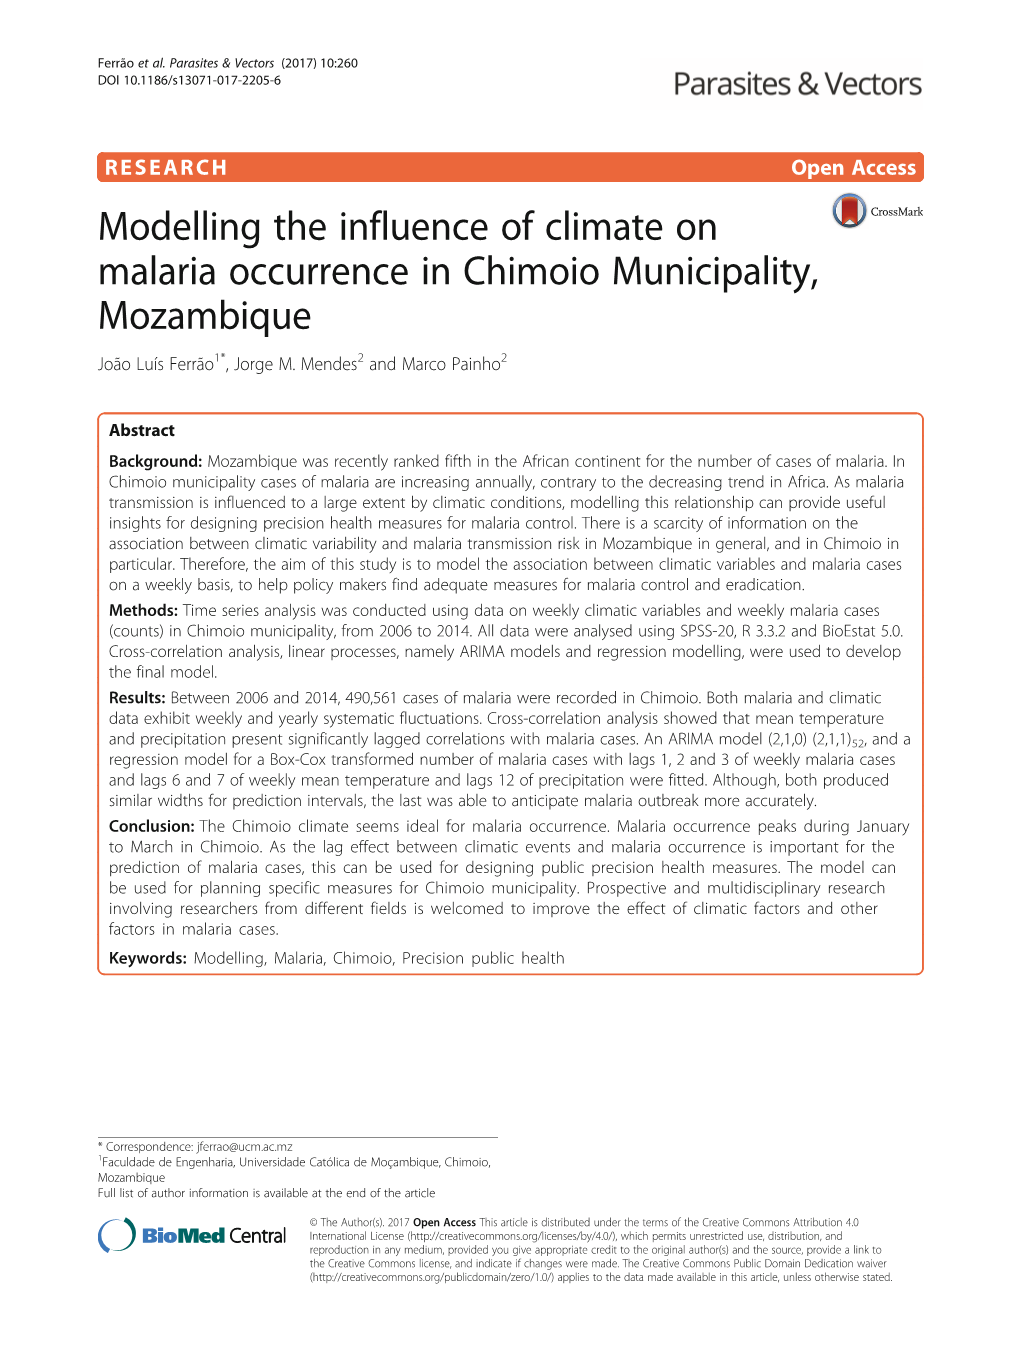 Modelling the Influence of Climate on Malaria Occurrence in Chimoio Municipality, Mozambique João Luís Ferrão1*, Jorge M